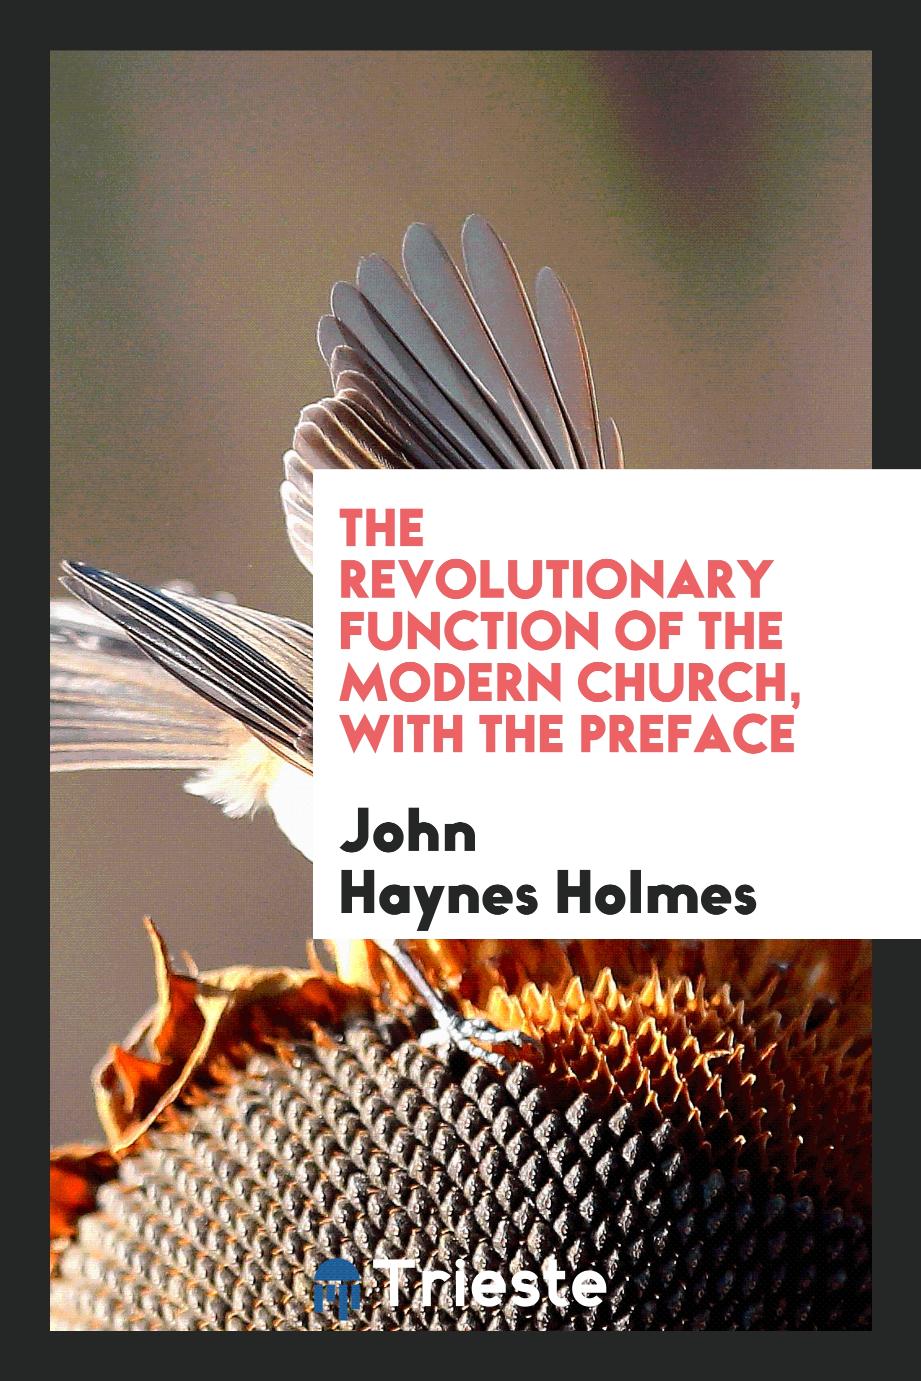 The Revolutionary Function of the Modern Church, with the Preface